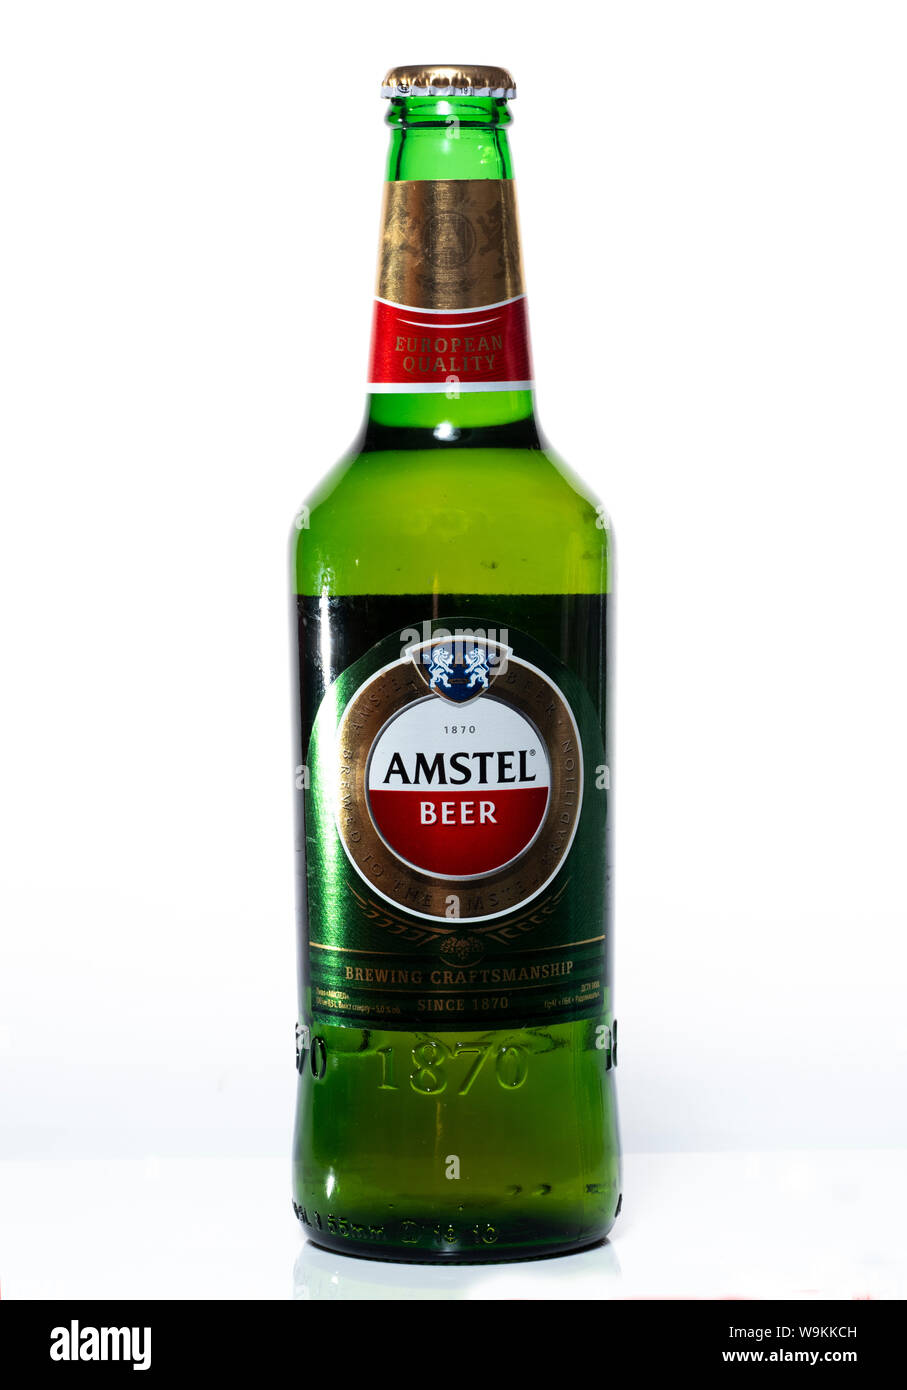 Amstel beer 0,5 l bottle isolated on white background Stock Photo